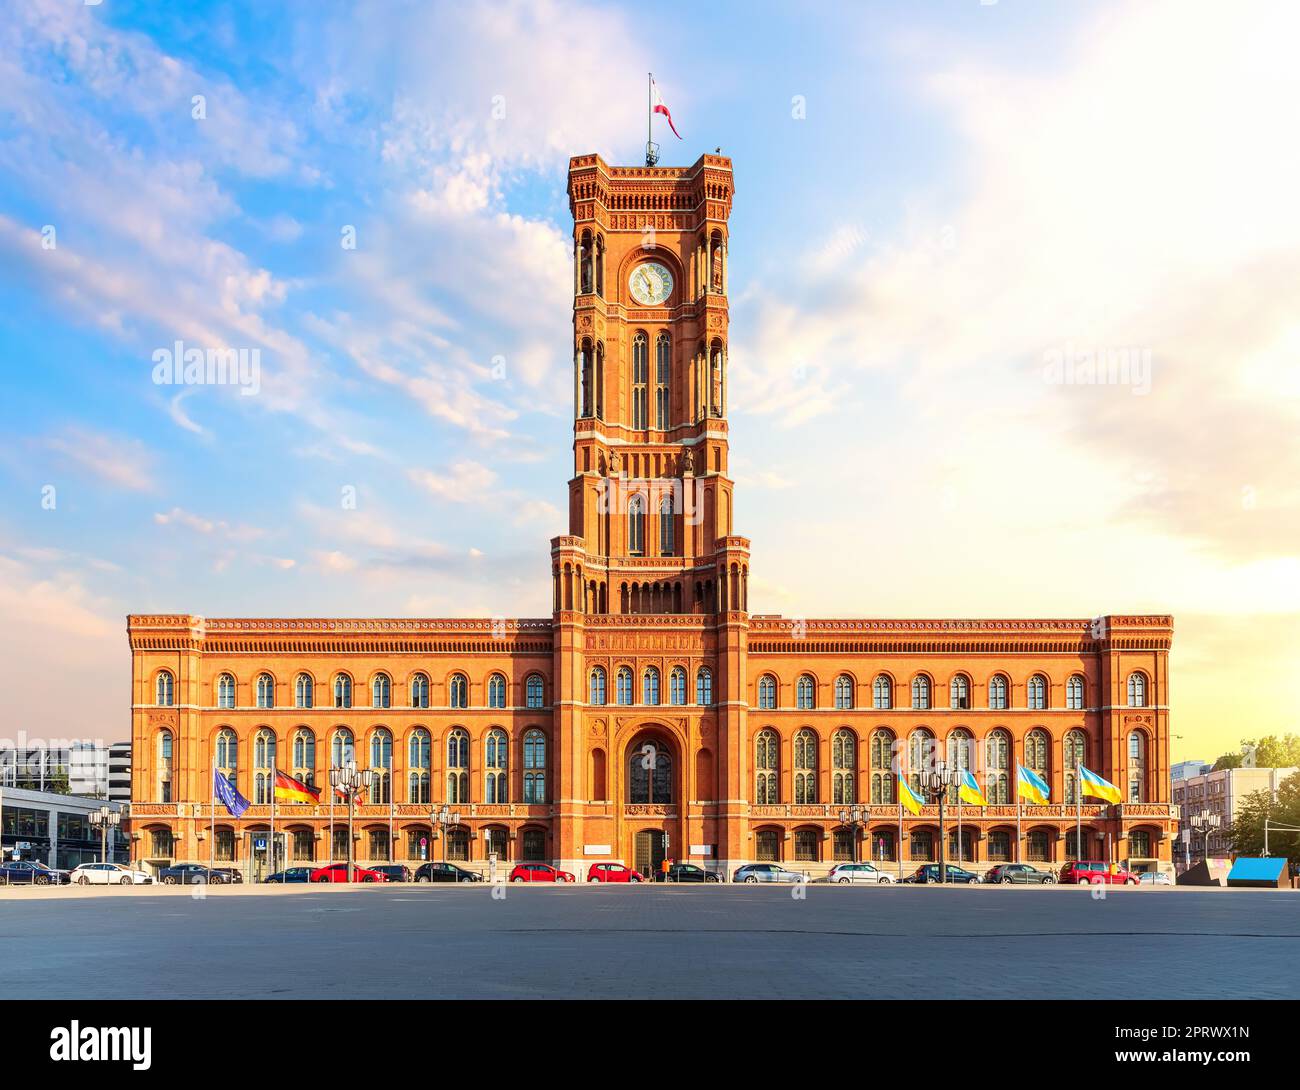 Rotes Rathaus or Red City Hall in Berlin, Germany Stock Photo